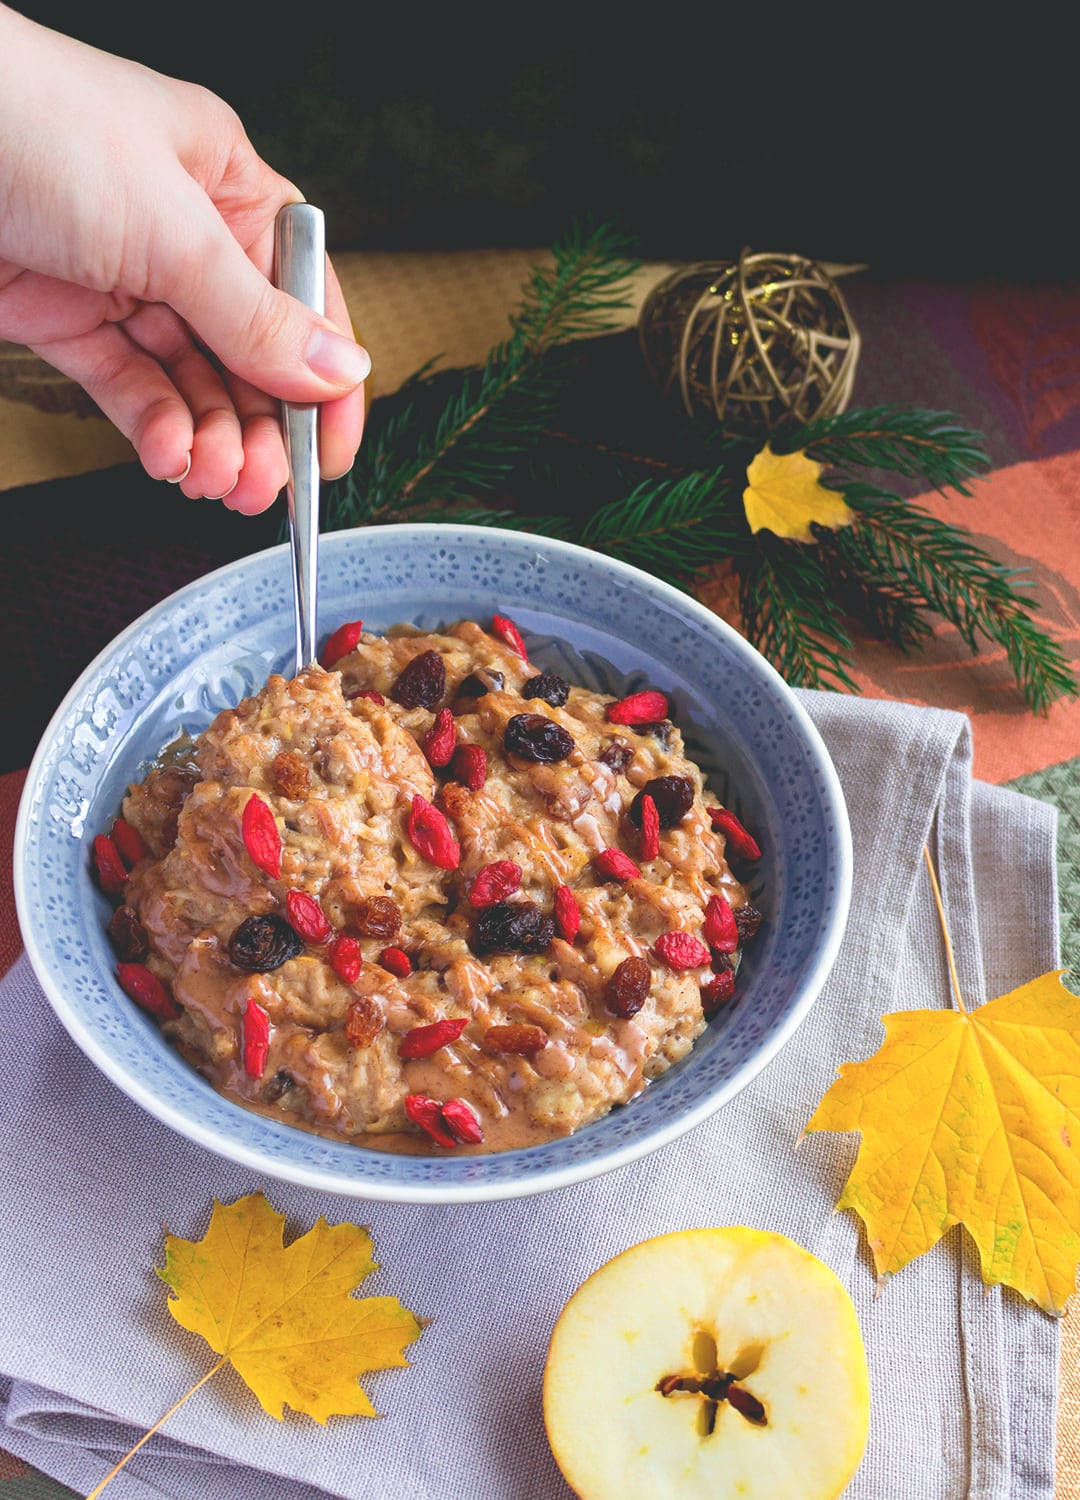 Apple Pie Oatmeal with Raisins and Goji Berries is the perfect breakfast for a gloomy Autumn day. It's easy, quick, delicious and really satisfying! I LOVE this recipe! | thehealthfulideas.com